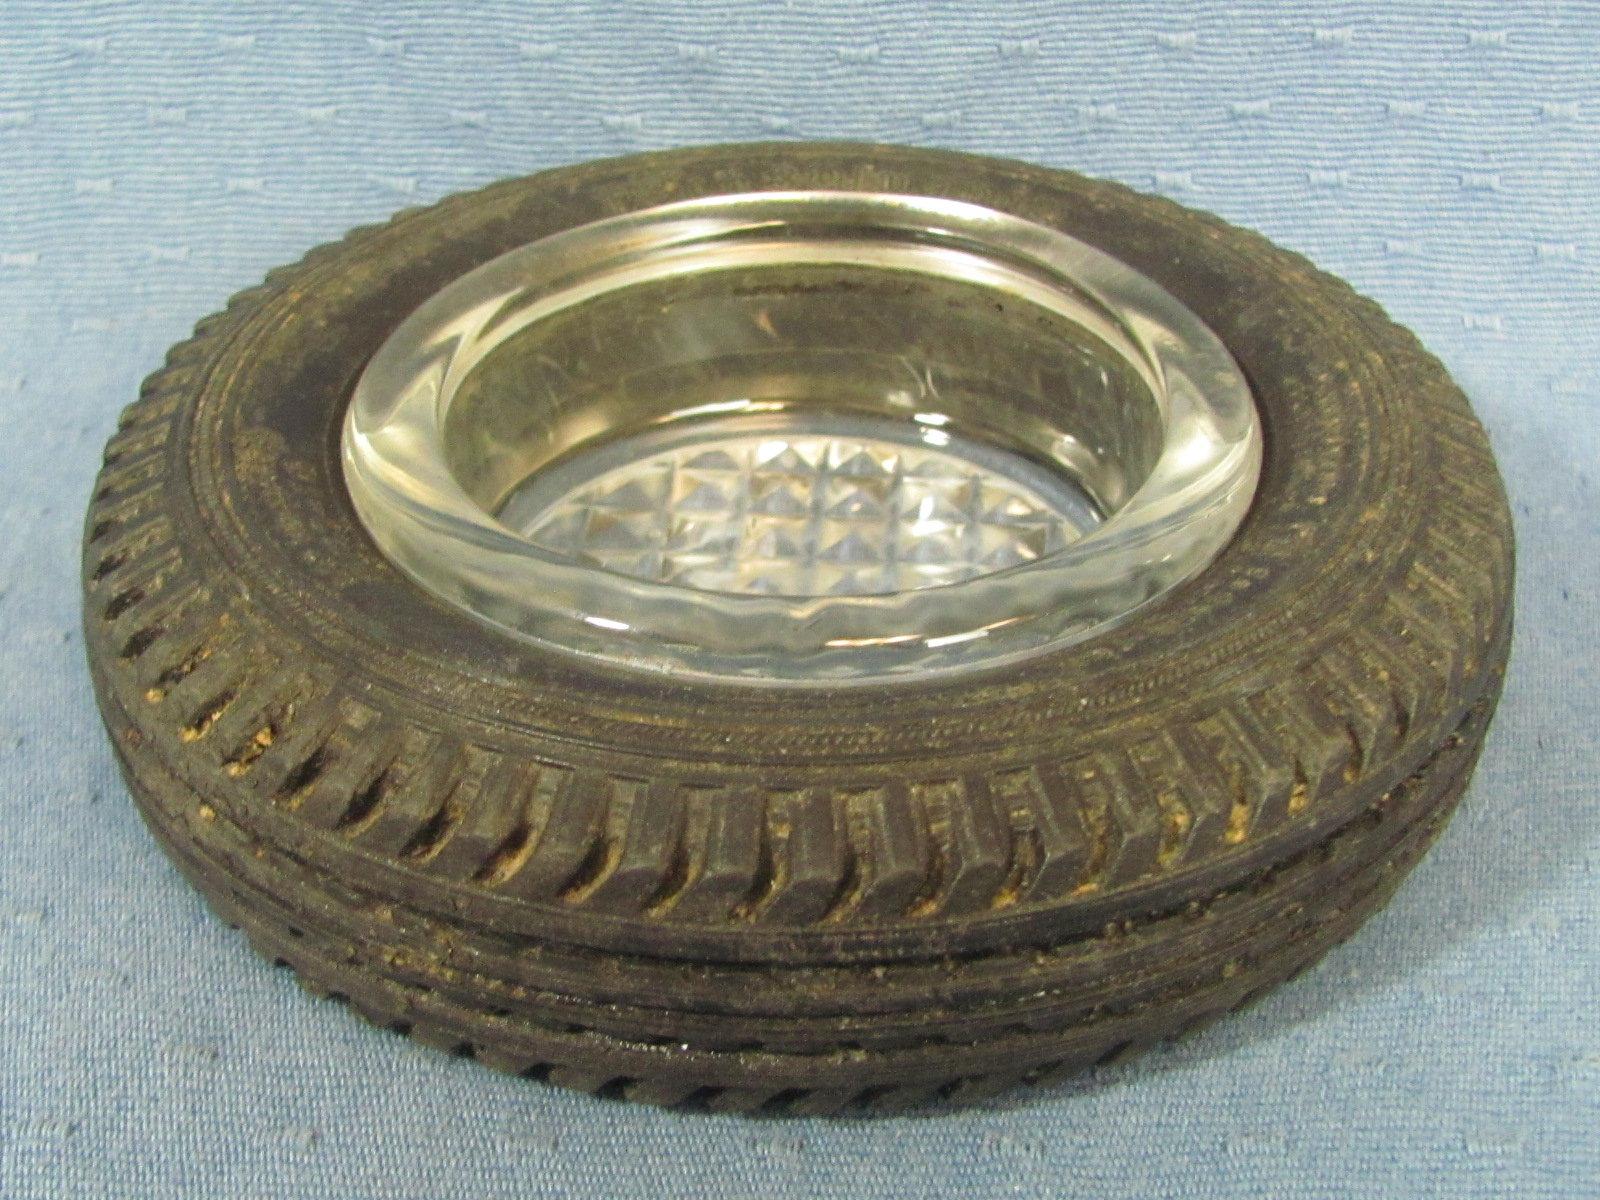 Ashtray with Rubber Tire Advertising – Pennsylvania Tire – 5 ½” diameter and 1 ½” tall